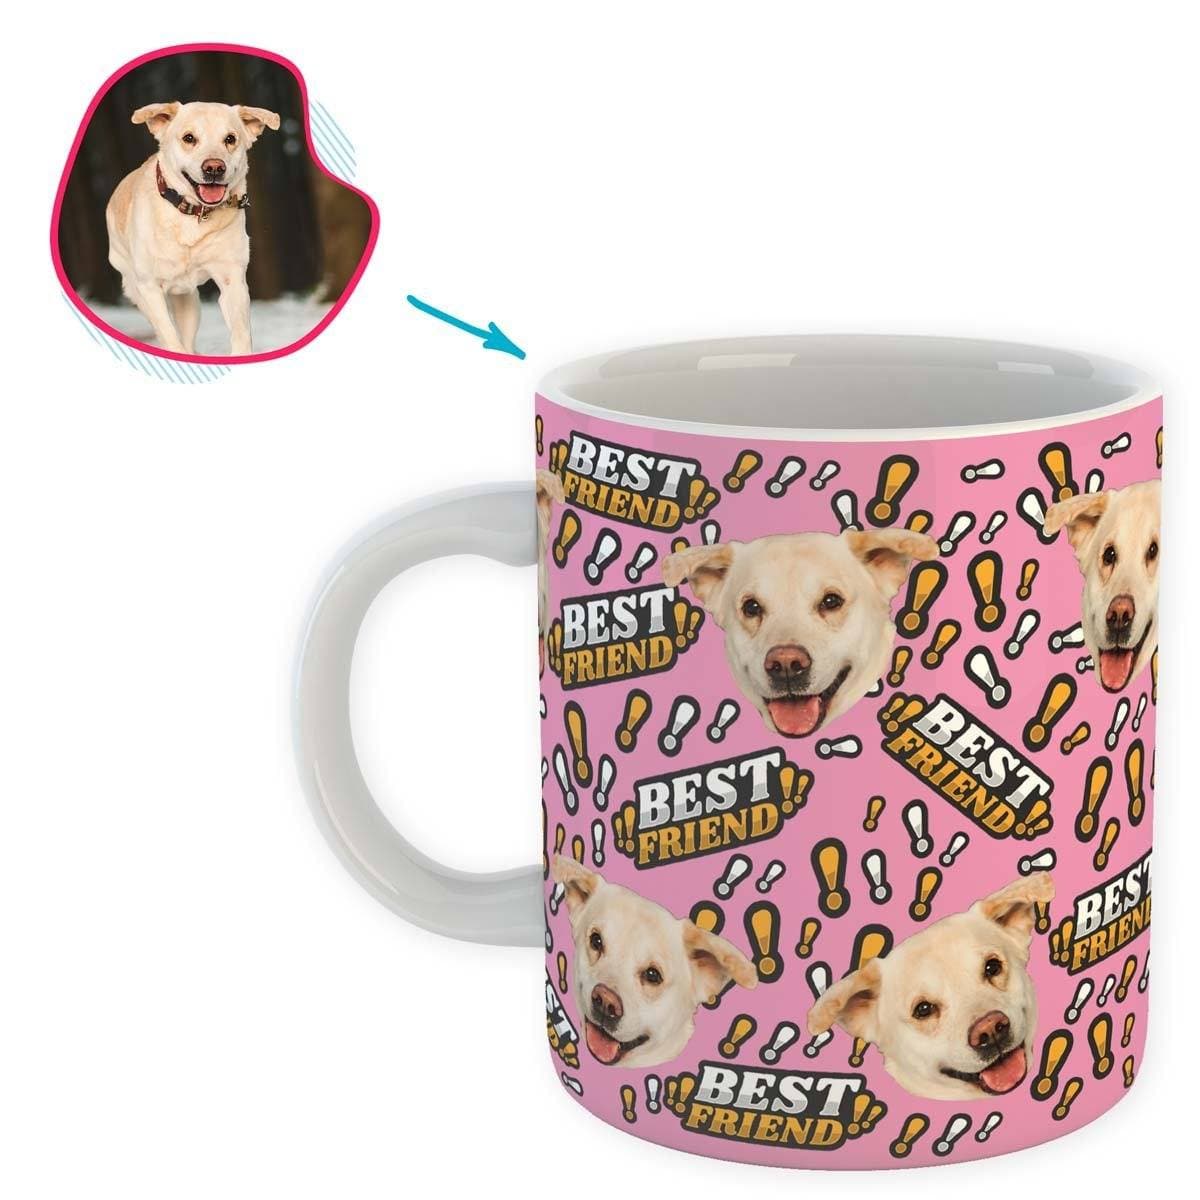 pink Best Friend mug personalized with photo of face printed on it